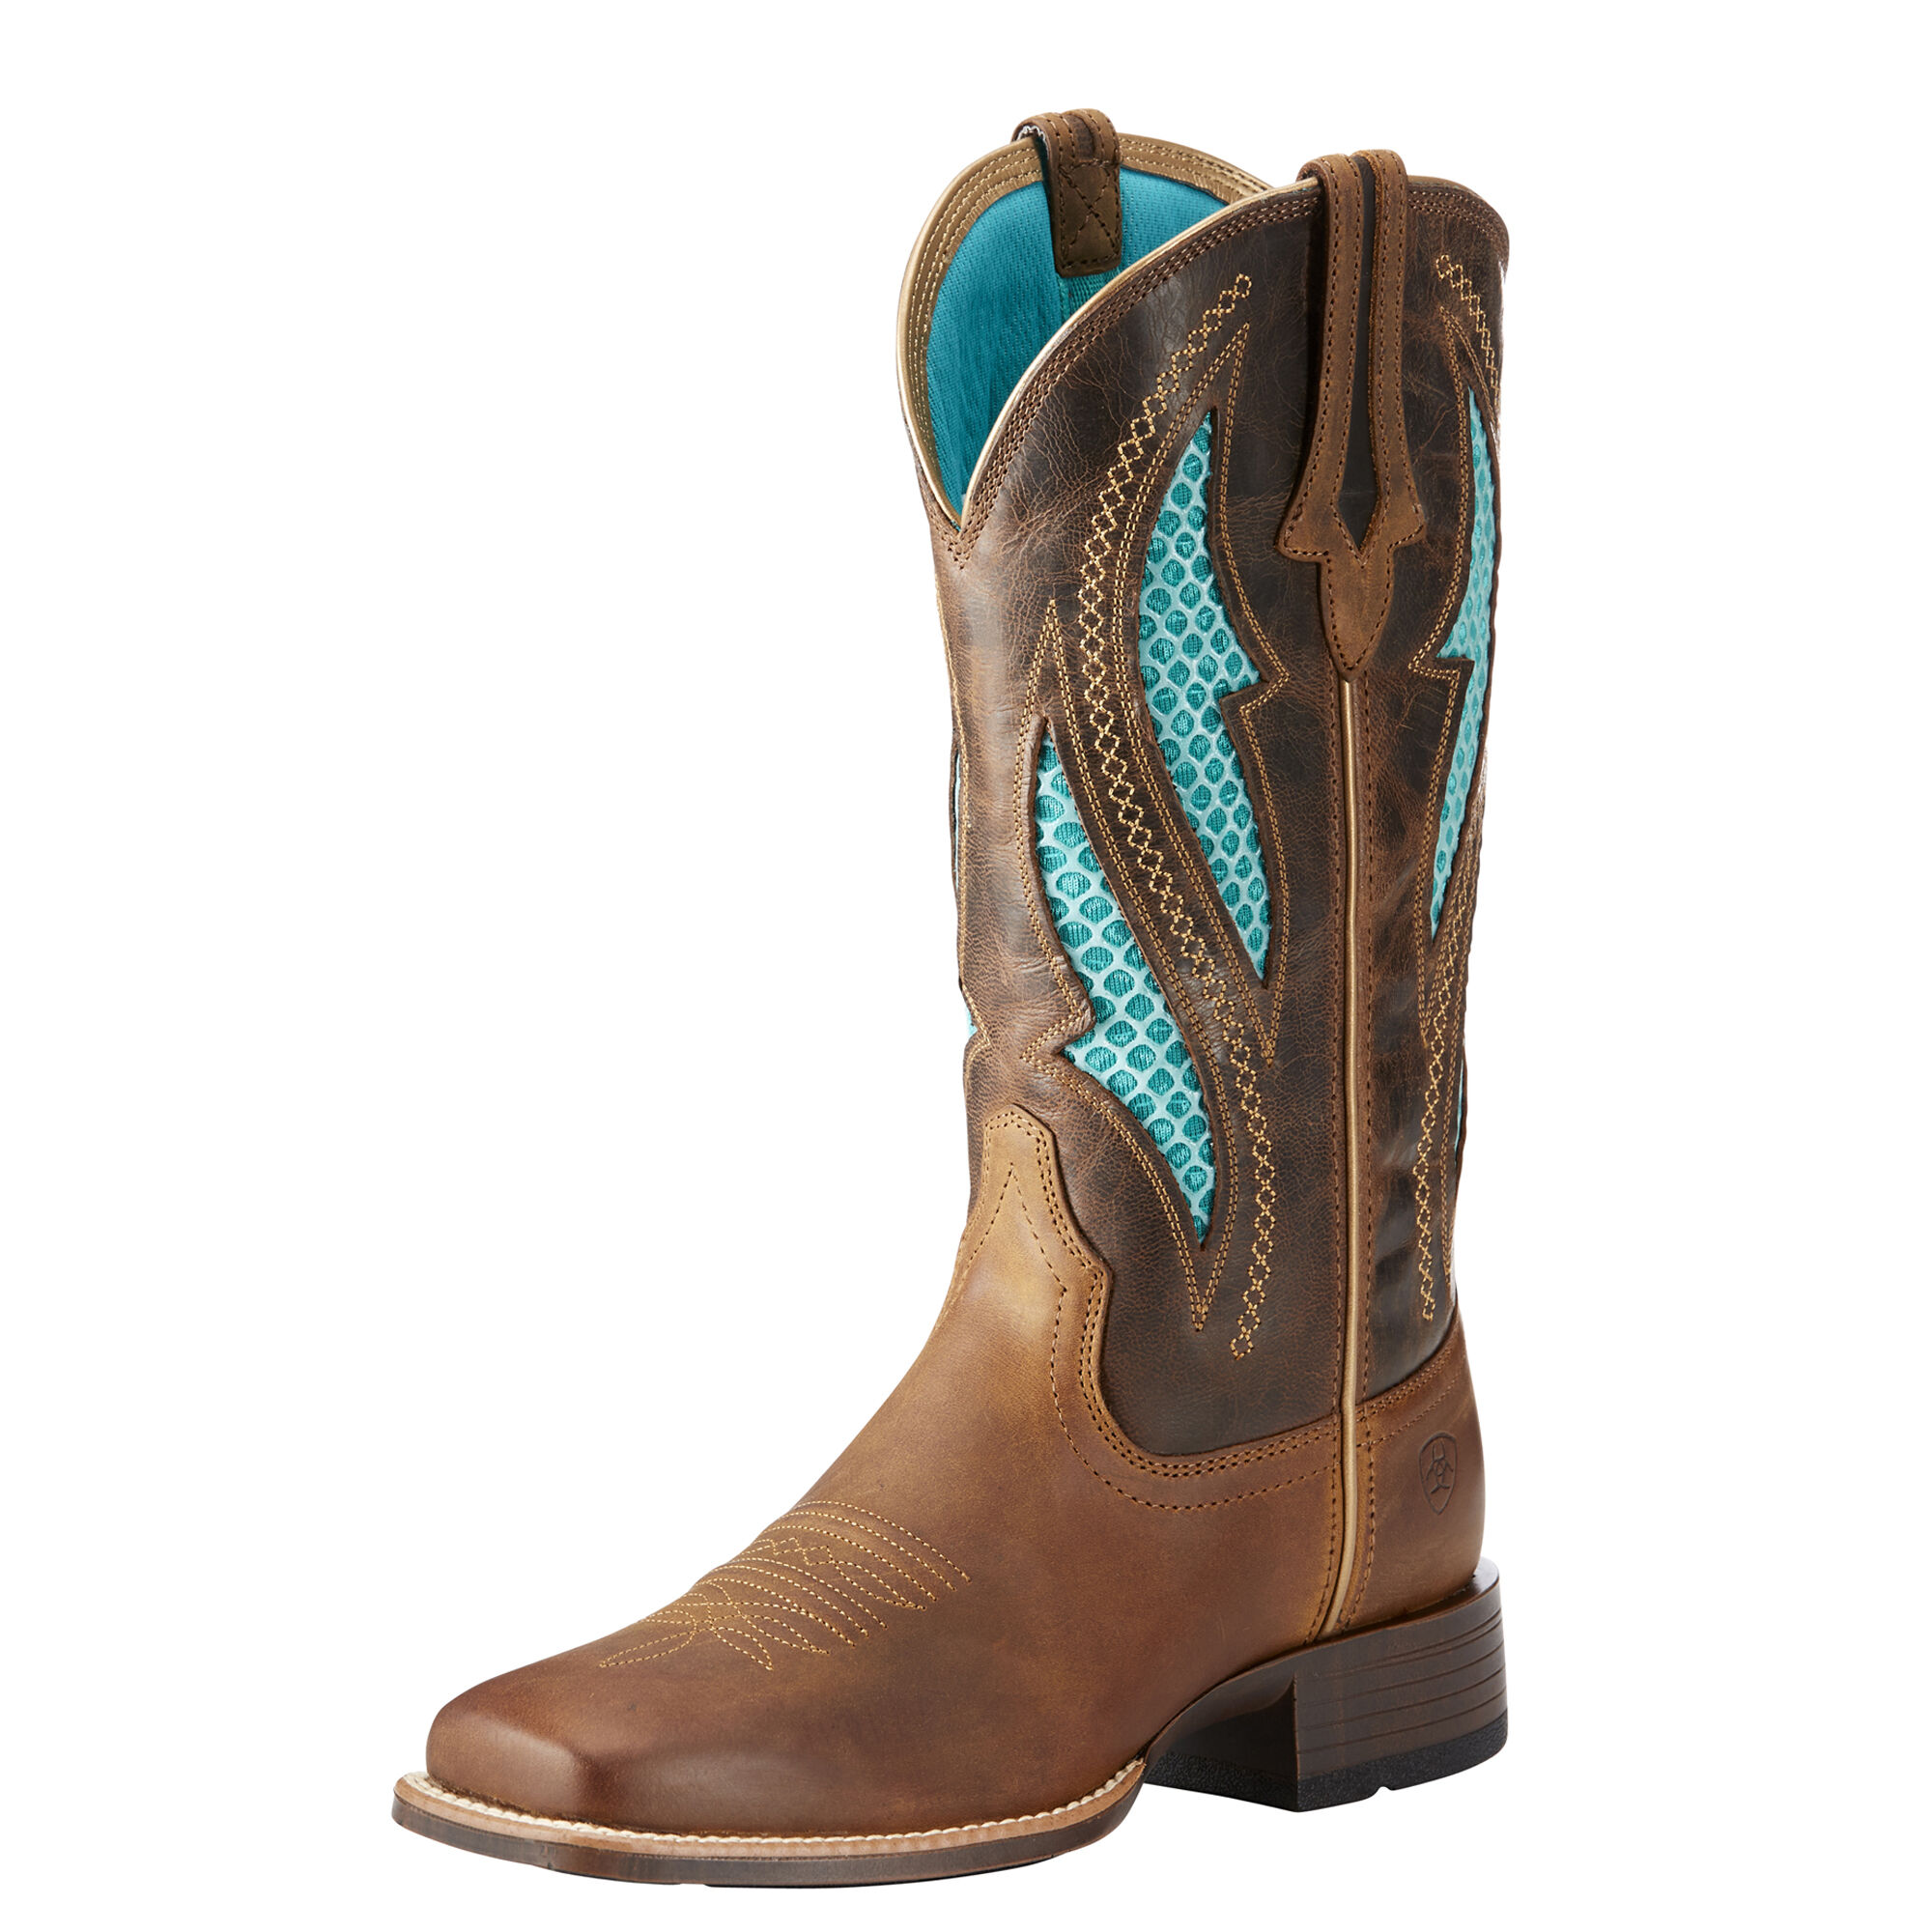 Women's VentTEK Ultra Western Boots in Distressed Brown Leather  by Ariat